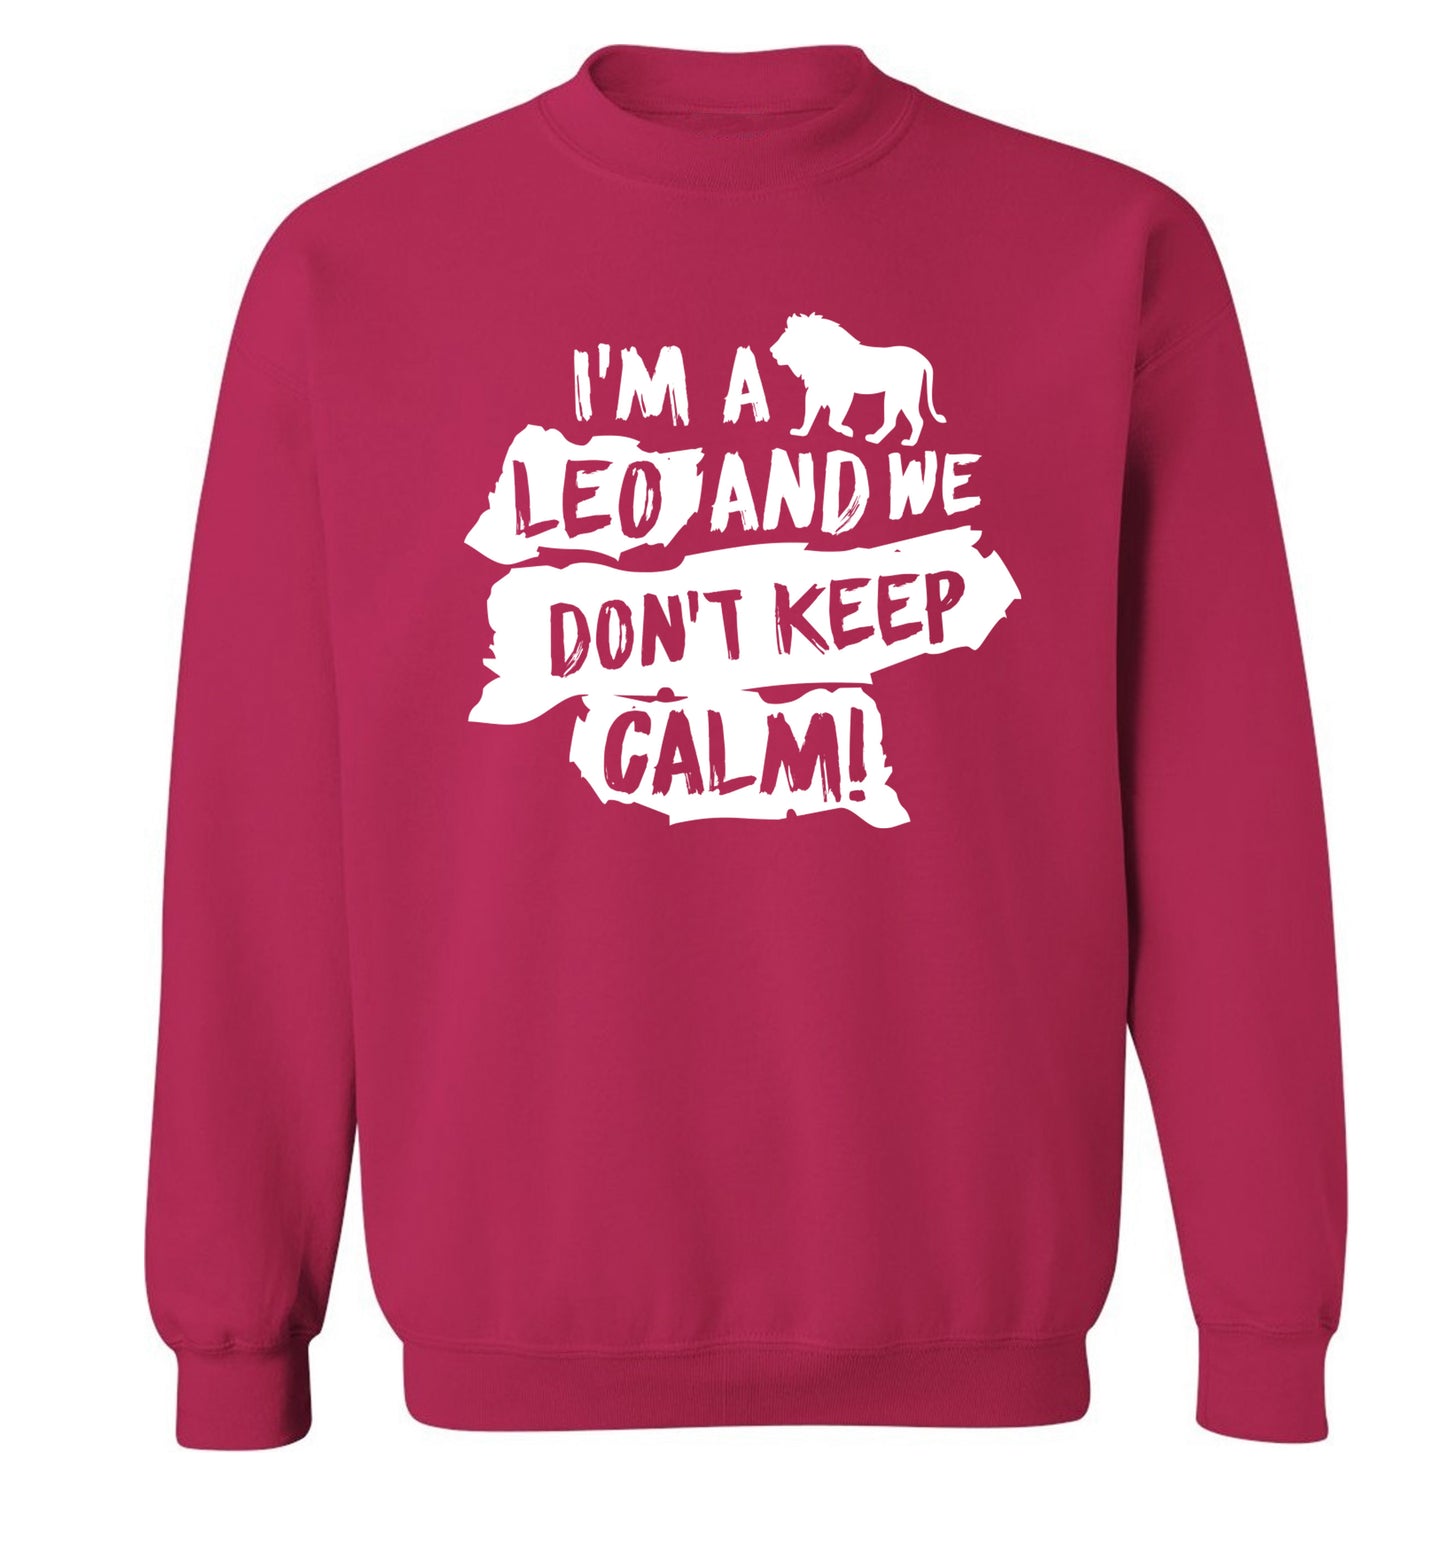 I'm a leo and we don't keep calm! Adult's unisex pink Sweater 2XL